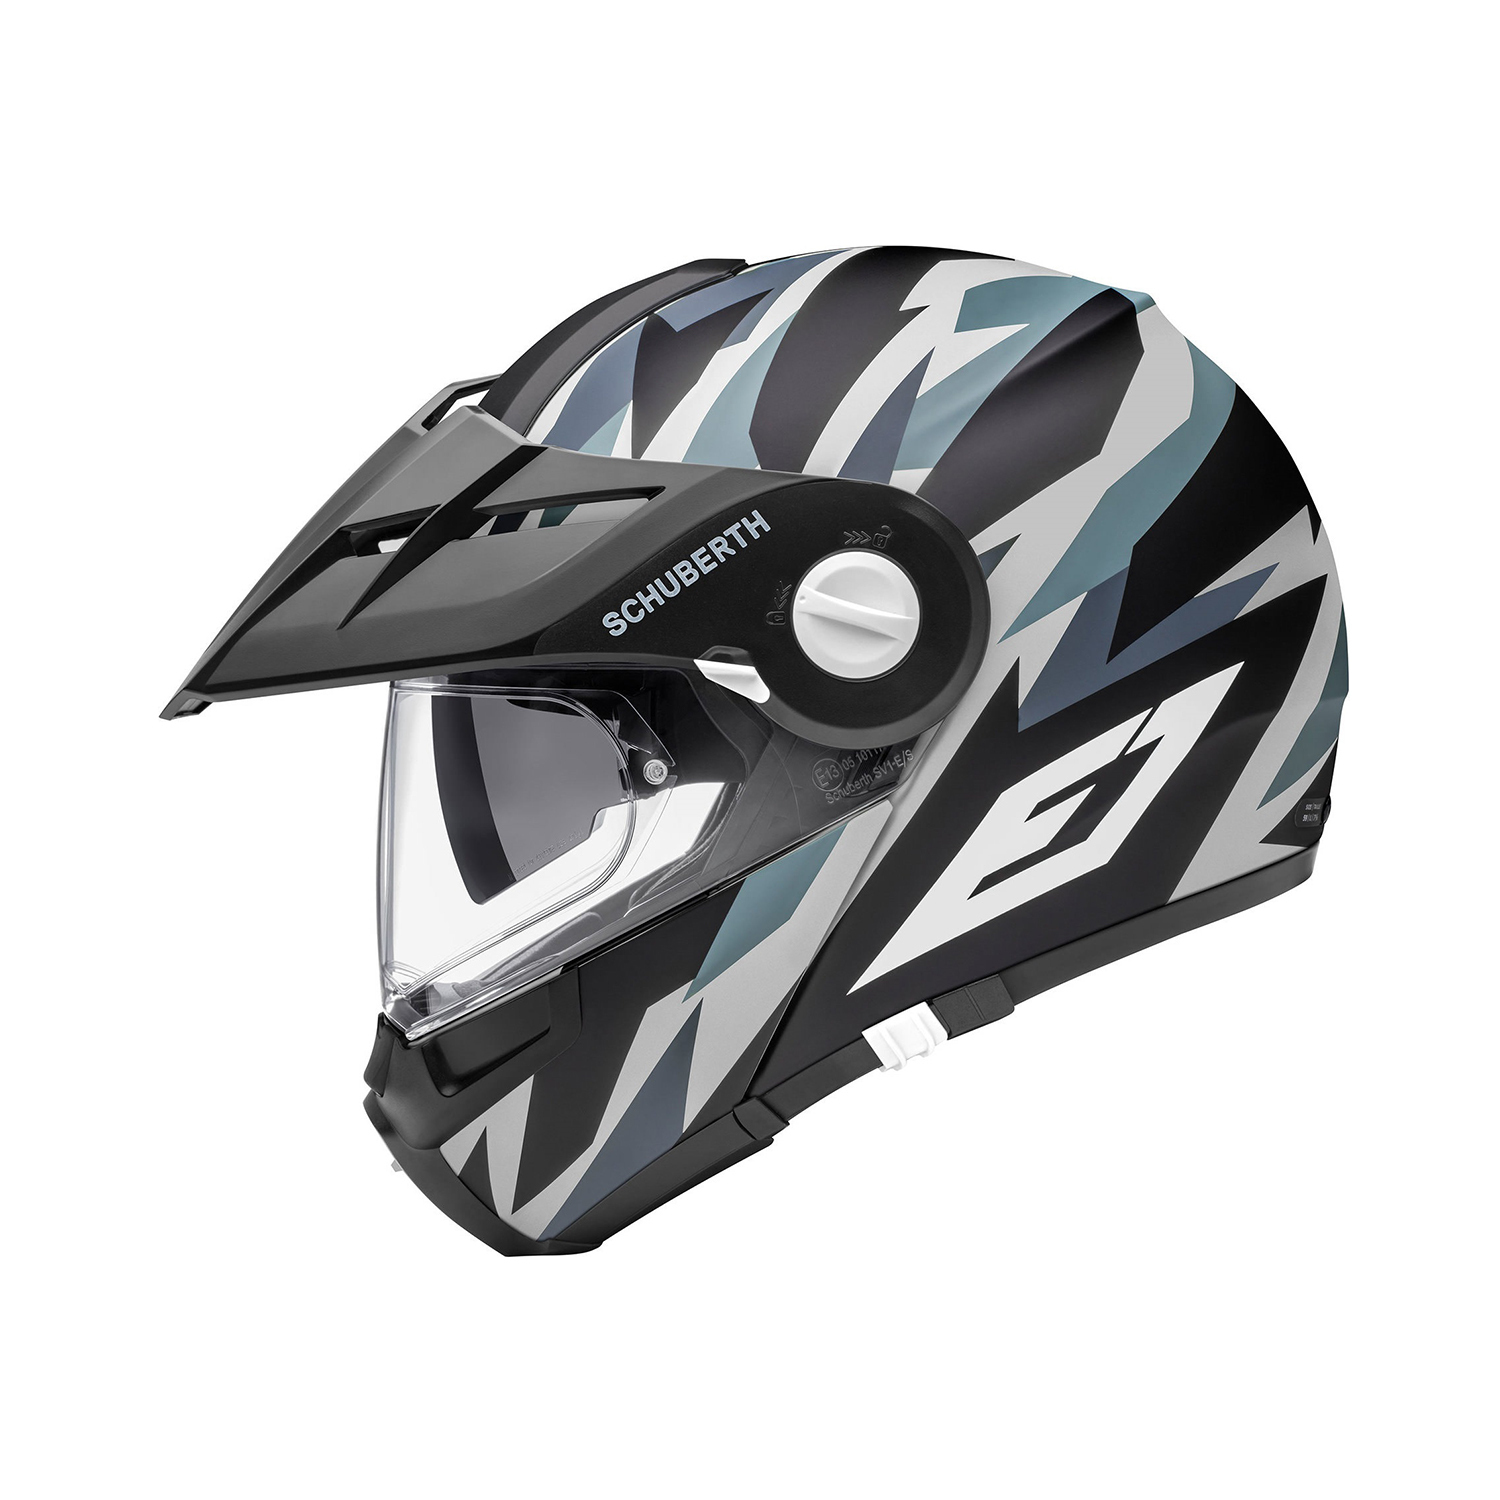 Schuberth E1 Adventure Helmet Rival Grey - Available in Various Sizes